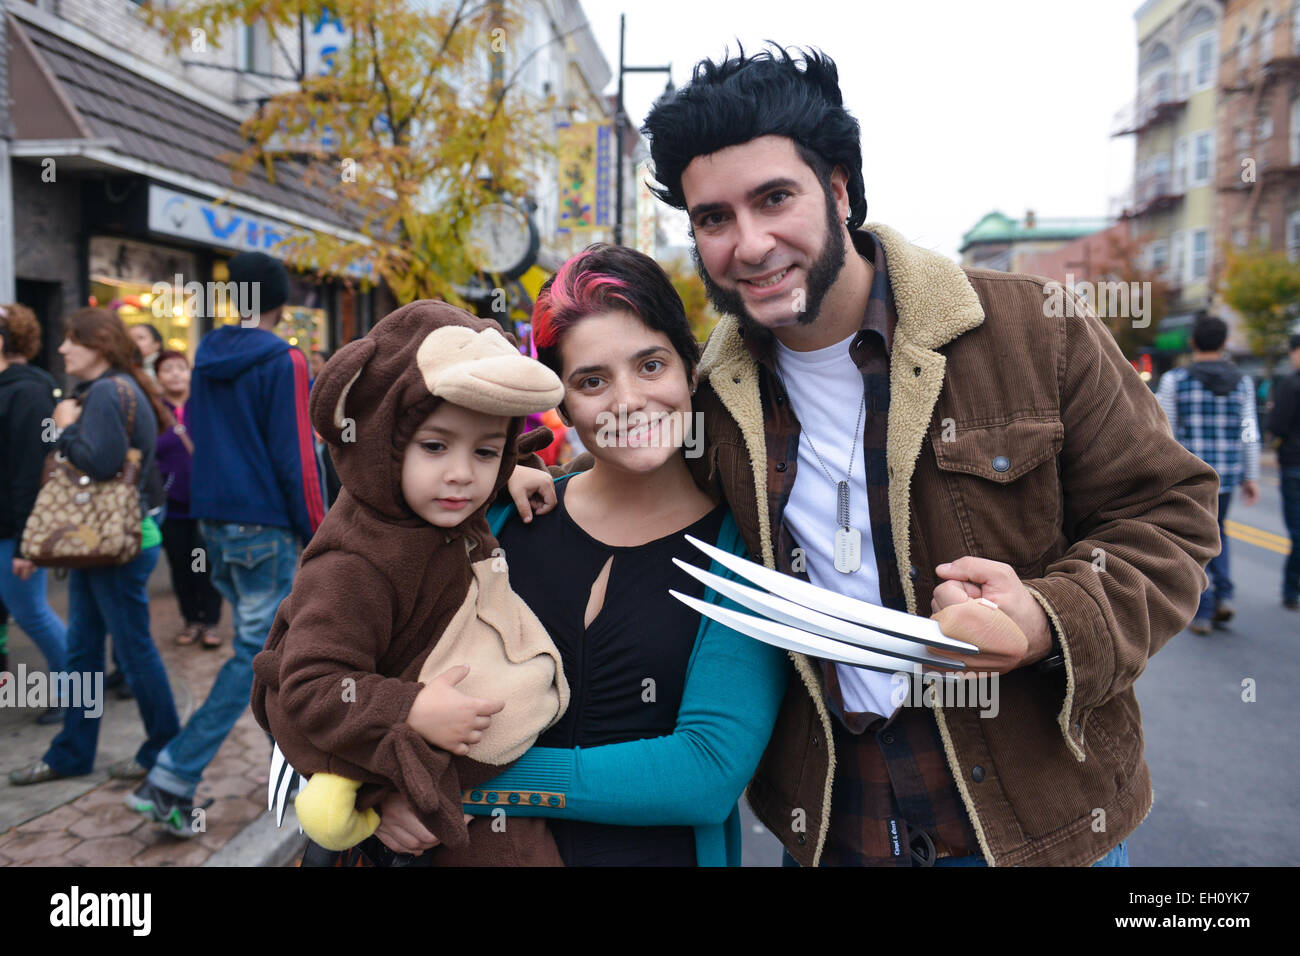 Mother and father dressed as Wolverine holding their son dressed as a monkey during the Halloween 2013 in Newark, New Jersey. Stock Photo